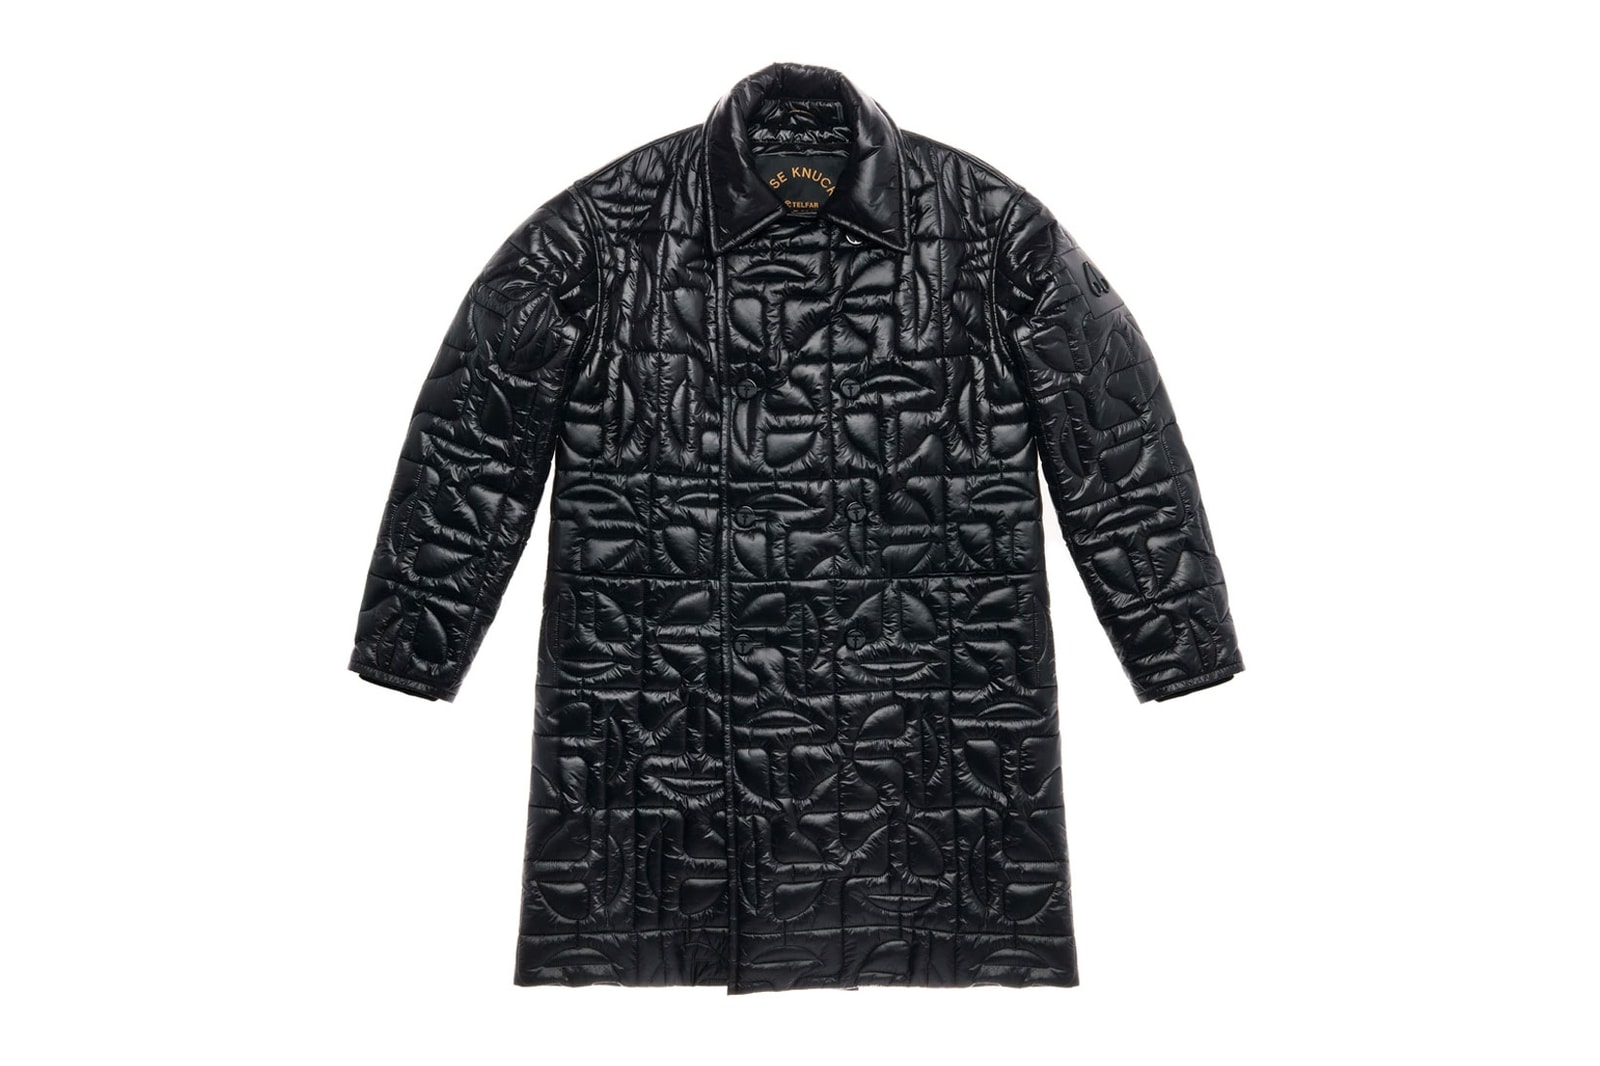 Telfar Moose Knuckles Puff Shopping Bag Outerwear Collaboration Release Date Where to buy